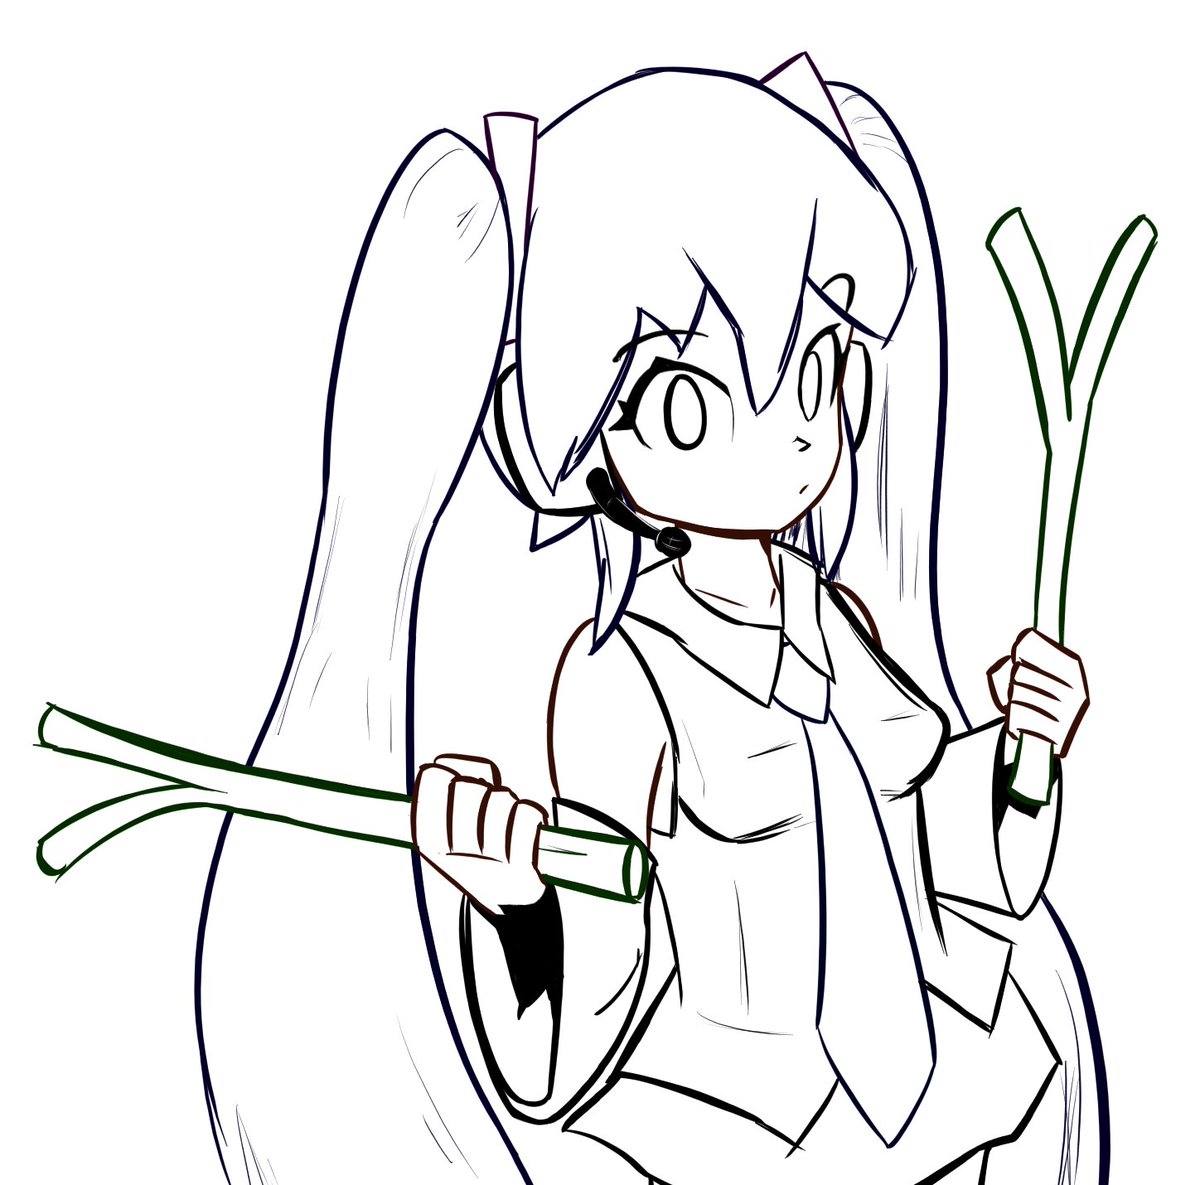 yeah now that looks more like Miku